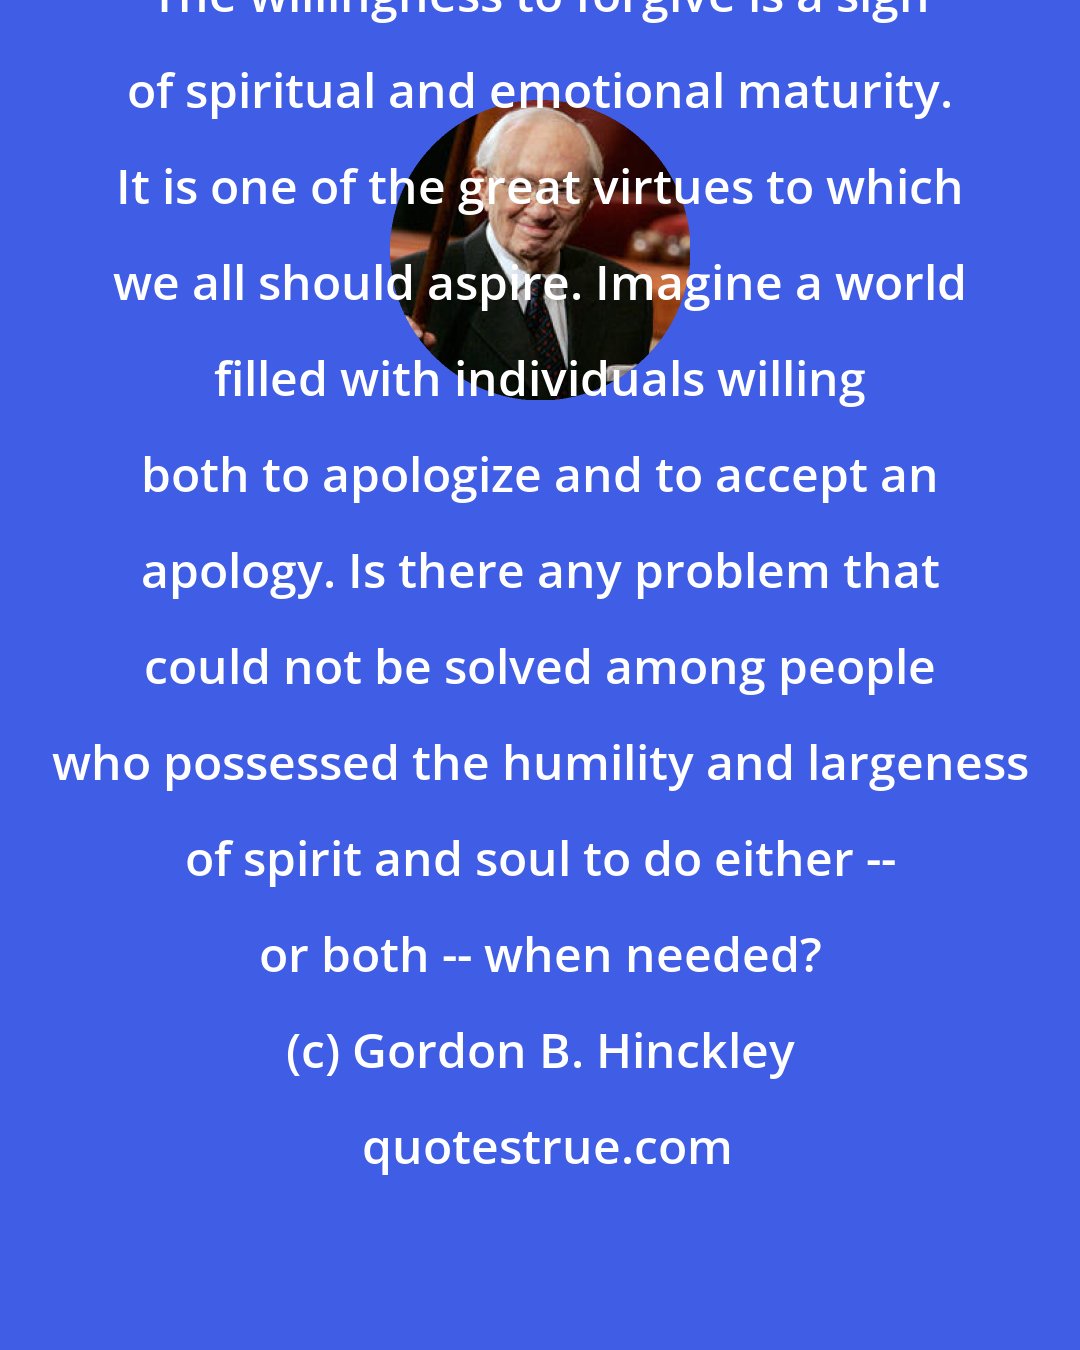 Gordon B. Hinckley: The willingness to forgive is a sign of spiritual and emotional maturity. It is one of the great virtues to which we all should aspire. Imagine a world filled with individuals willing both to apologize and to accept an apology. Is there any problem that could not be solved among people who possessed the humility and largeness of spirit and soul to do either -- or both -- when needed?